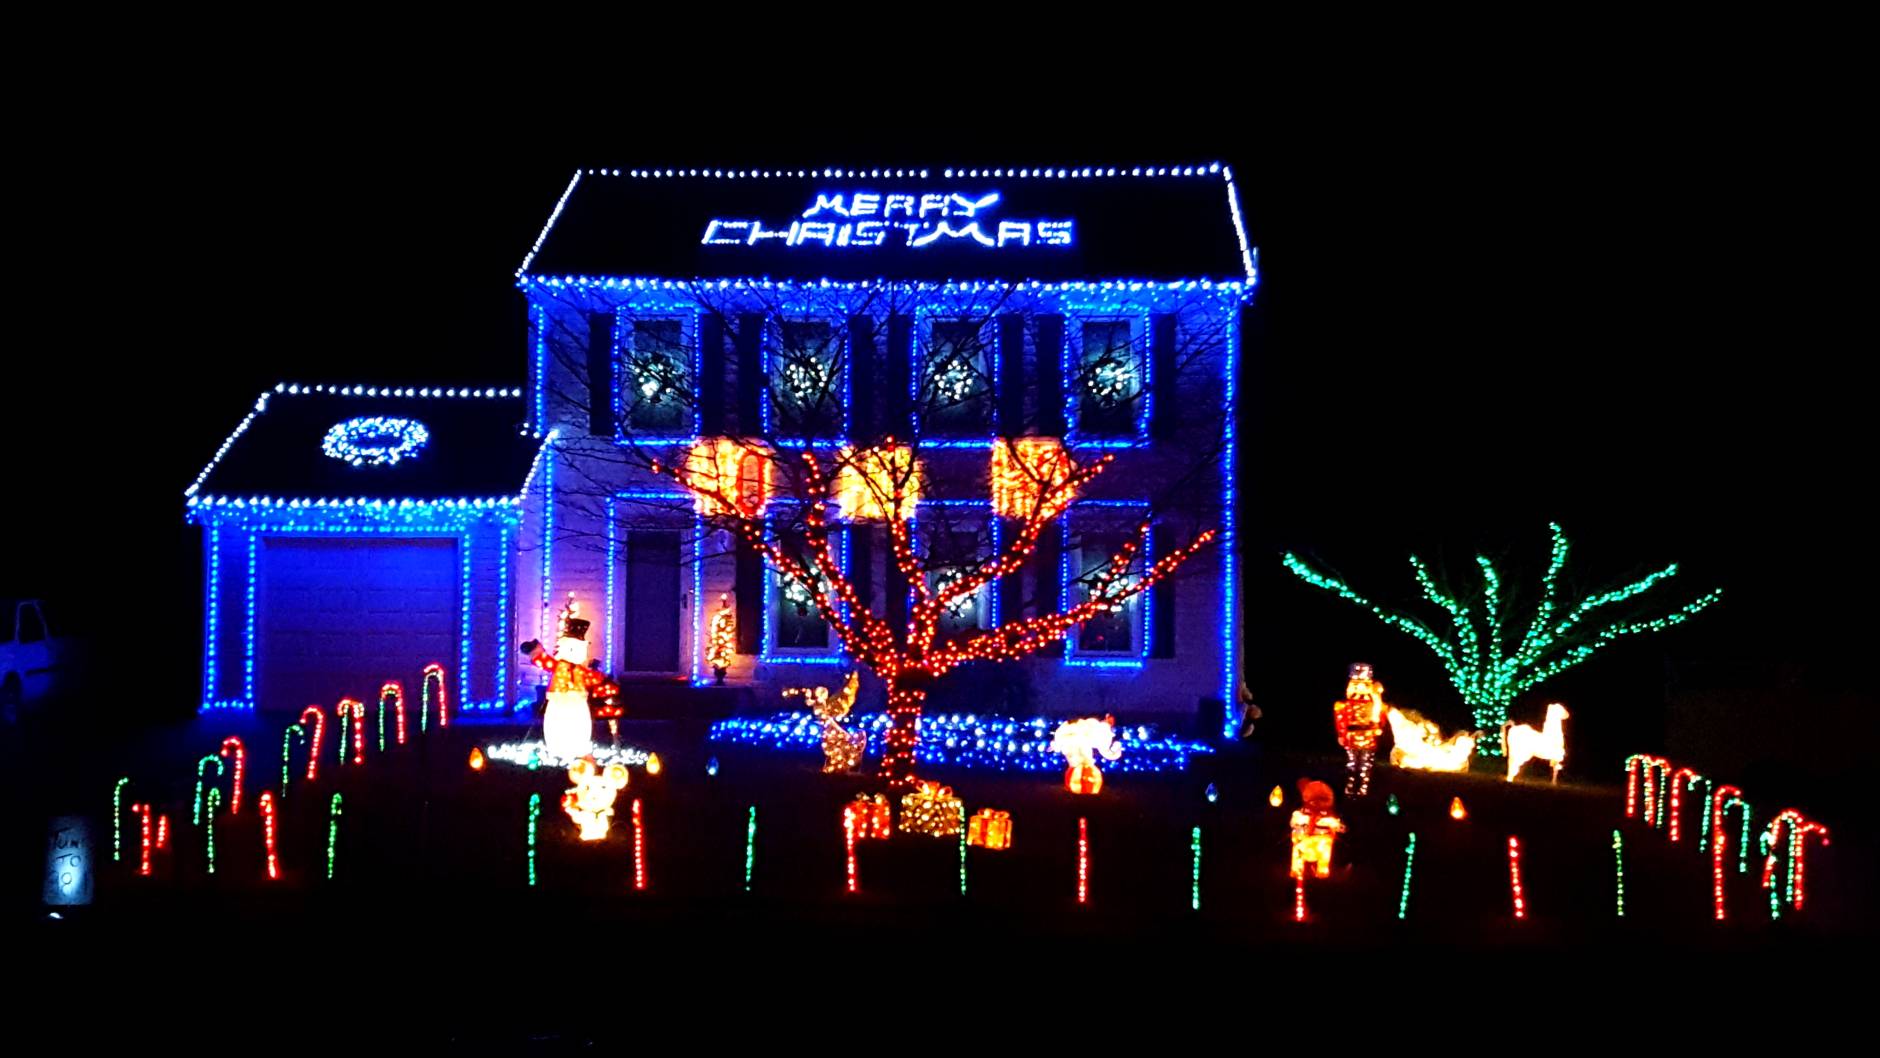 This twinkling light display  is animated to music, with a 15-minute show that plays continuously from 5:30 to 10 p.m. Lights remain on until midnight. See this home at 14549B Lock Drive in Centreville, Virginia. (Courtesy Lisa Abraham)